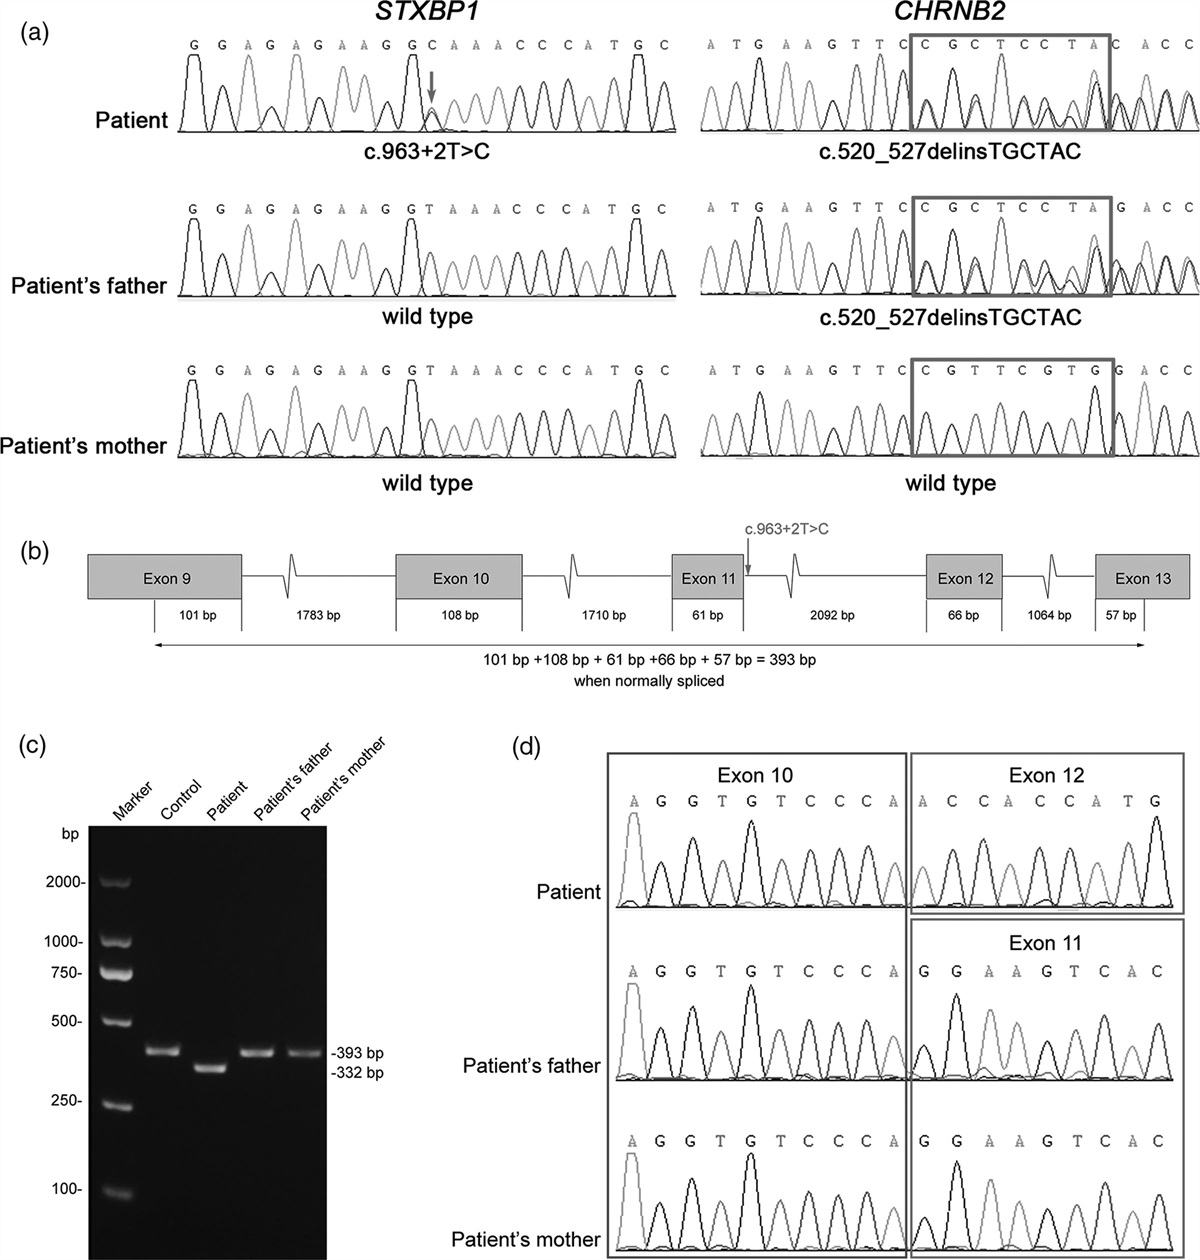 Two novel variants of the STXBP1 and CHRNB2 genes identified in a Chinese boy with refractory seizures and developmental delay